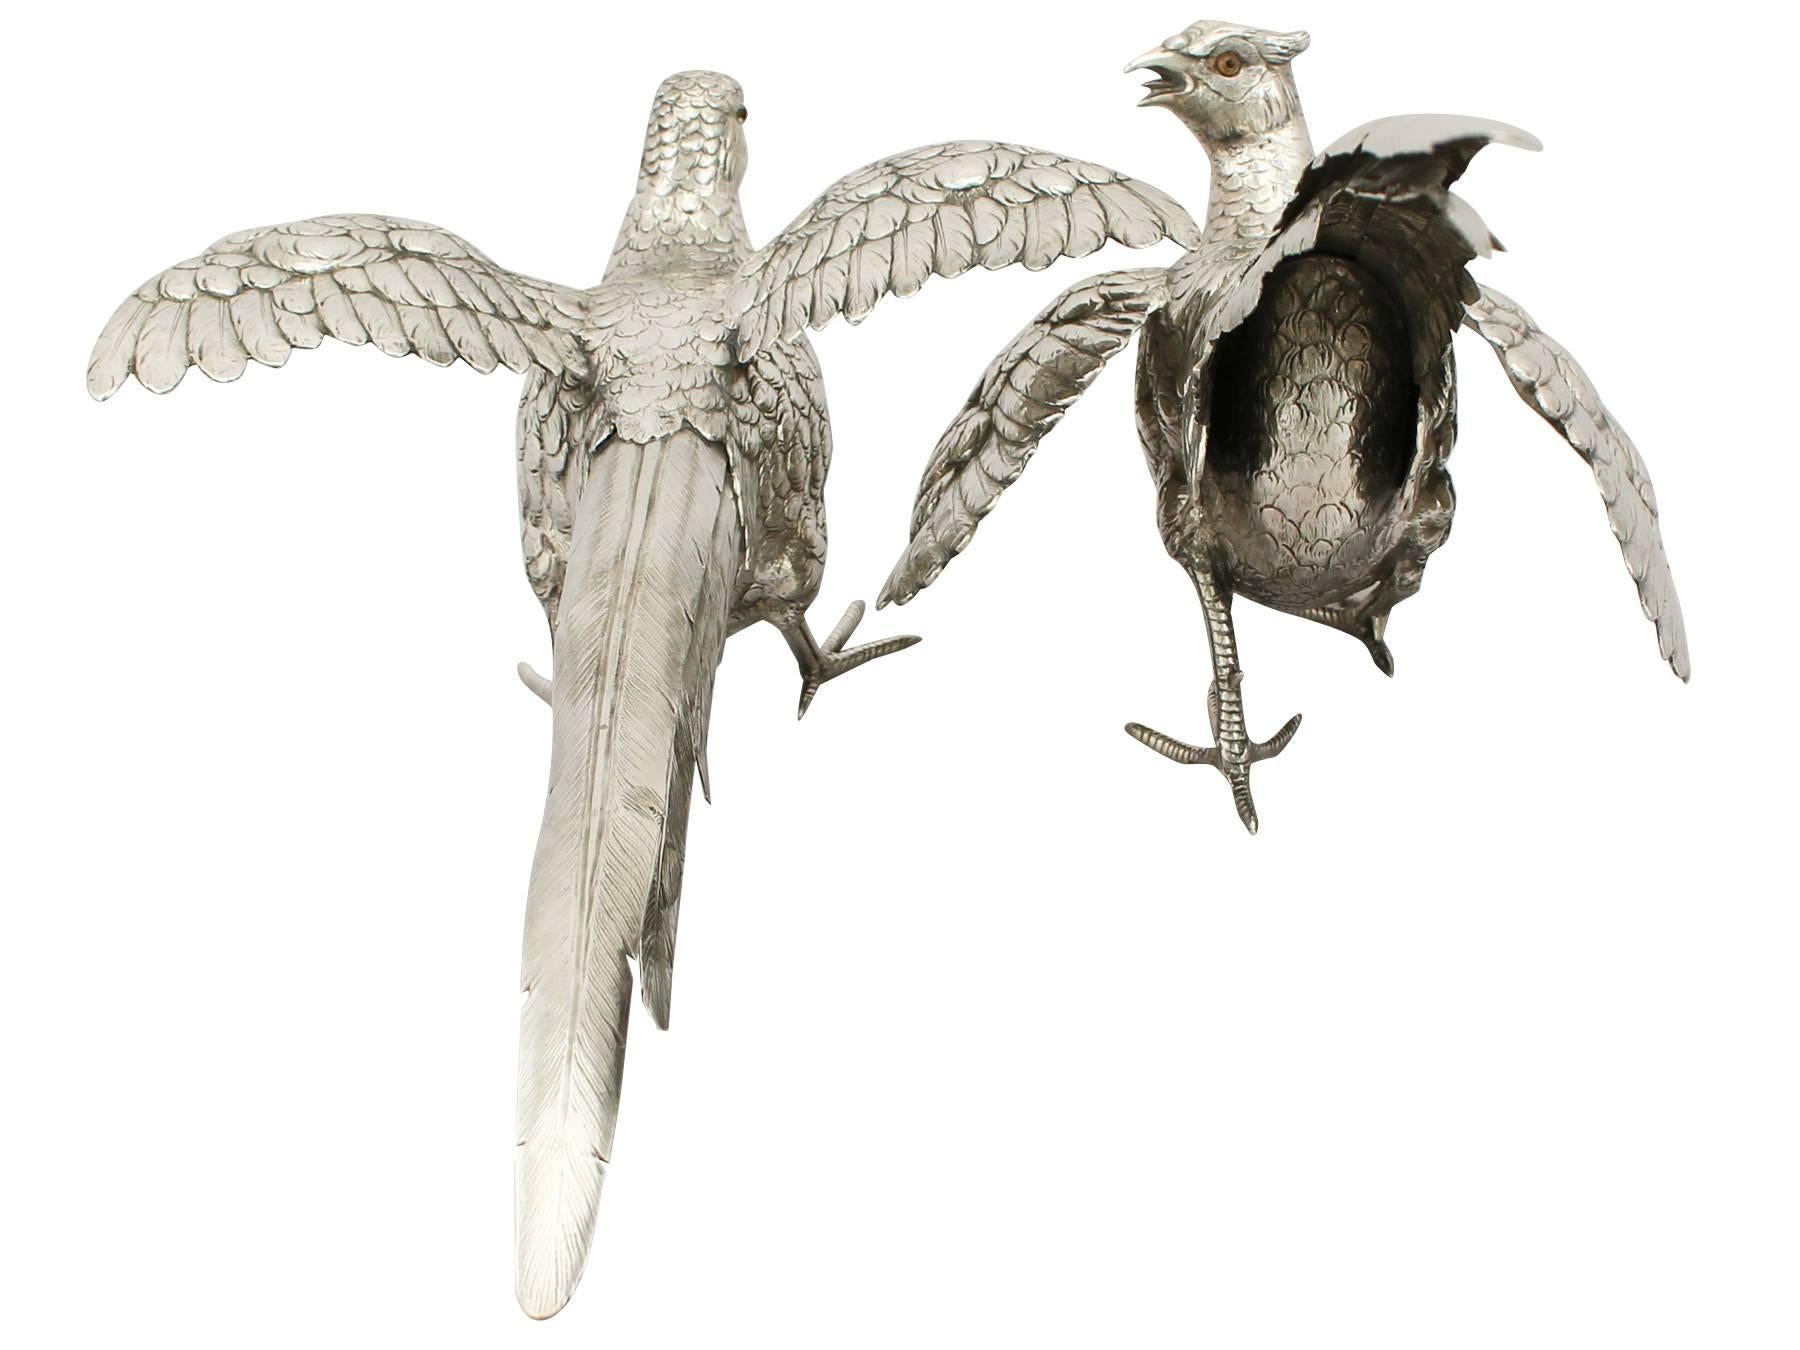 A magnificent, fine and impressive large pair of vintage German sterling silver table pheasants; part of our continental ornamental silverware collection.

These magnificent antique cast German silver table ornaments have been realistically modelled